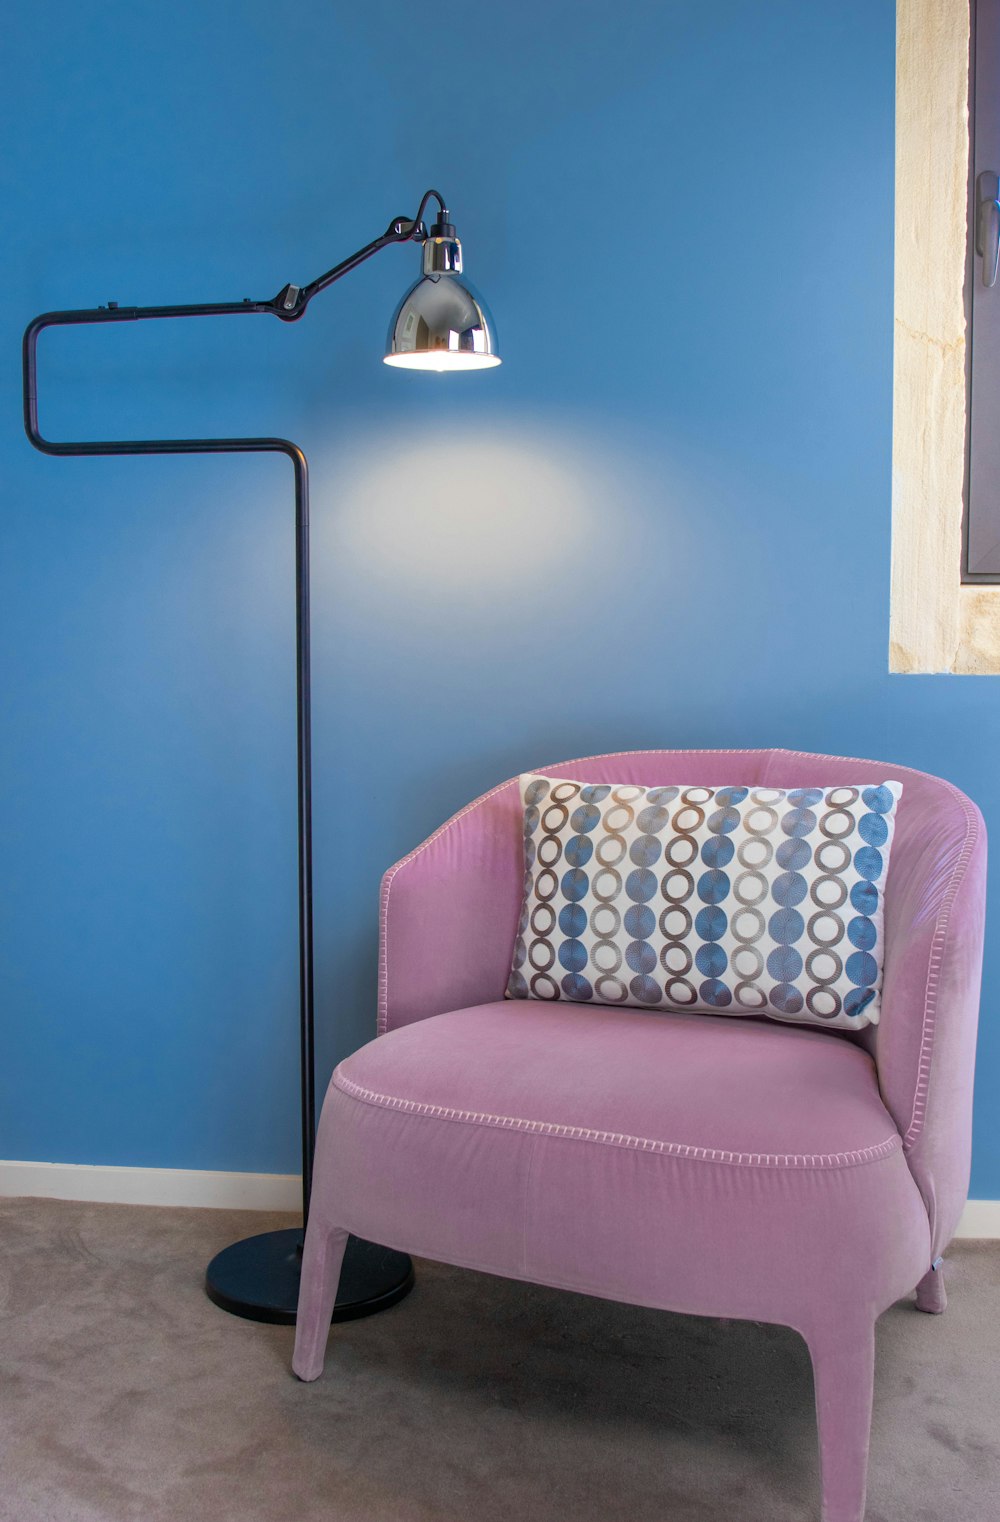 turned-on cantilever lamp beside sofa chair